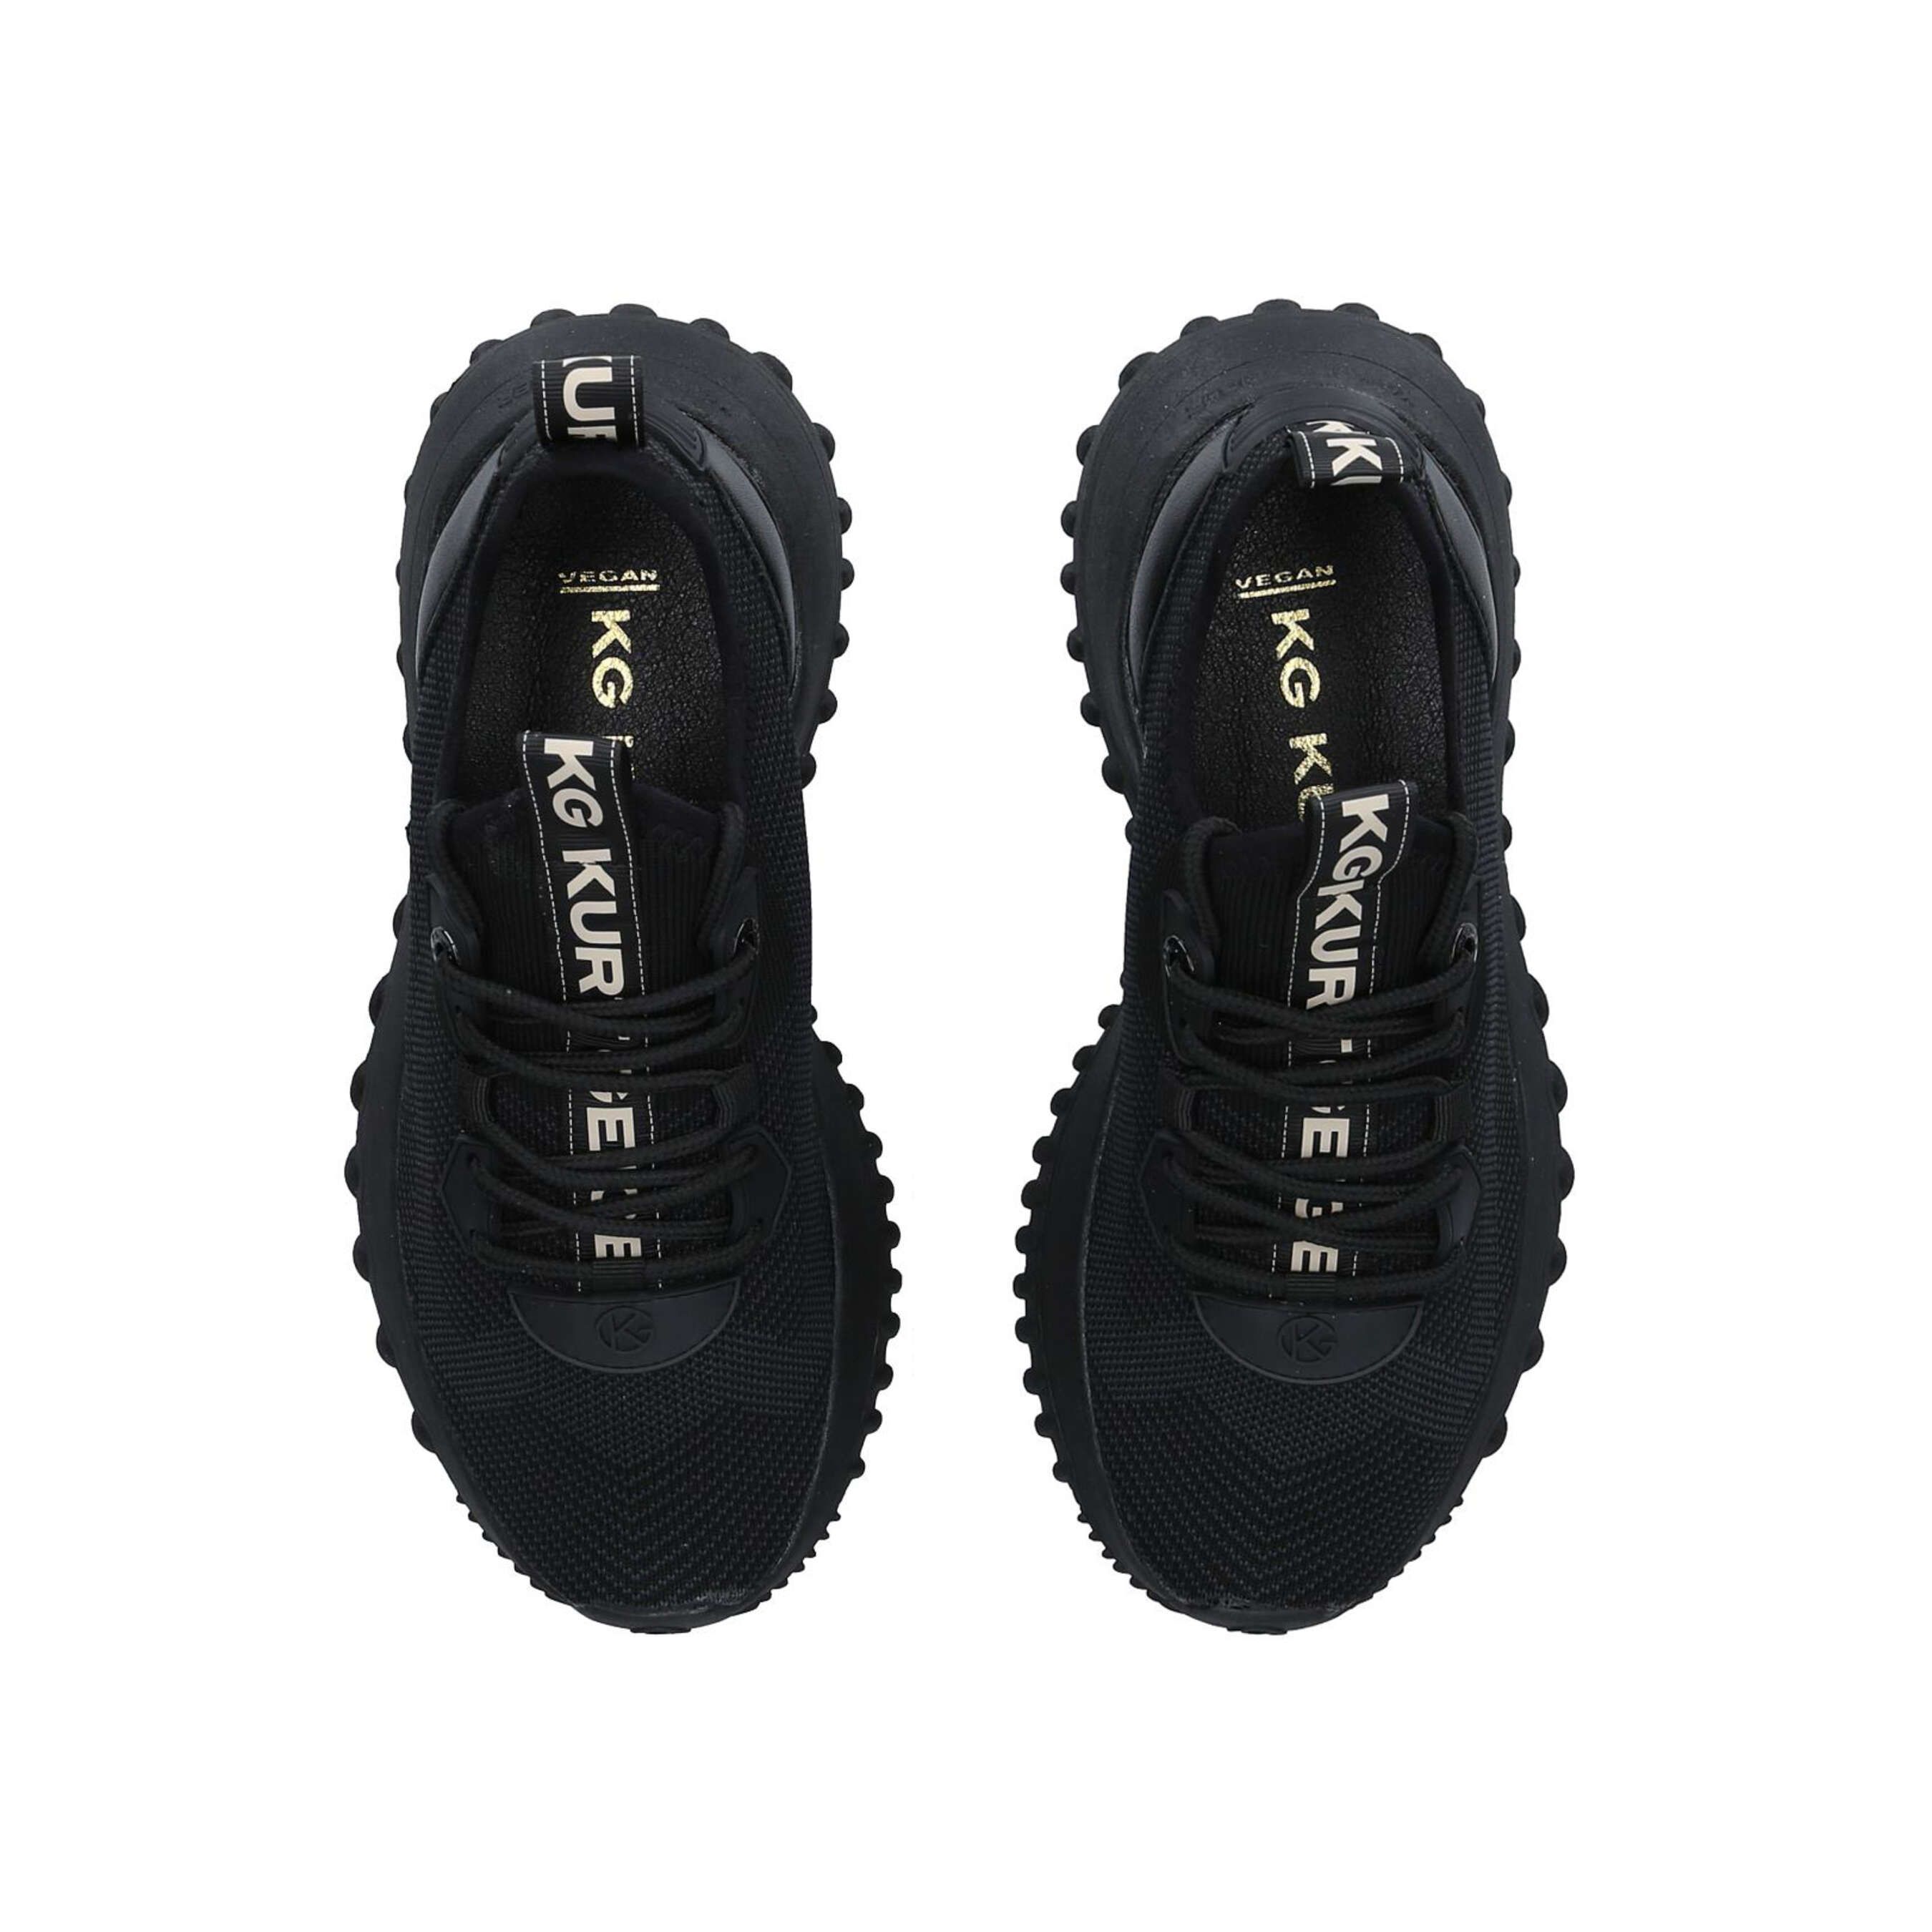 The Lowell Knit sneaker features a black fabric upper with lace up front. The heel and tongue feature the KG Kurt Geiger logo printed on ribbed textile with a print stitch detailing. The sole features a tread detail.